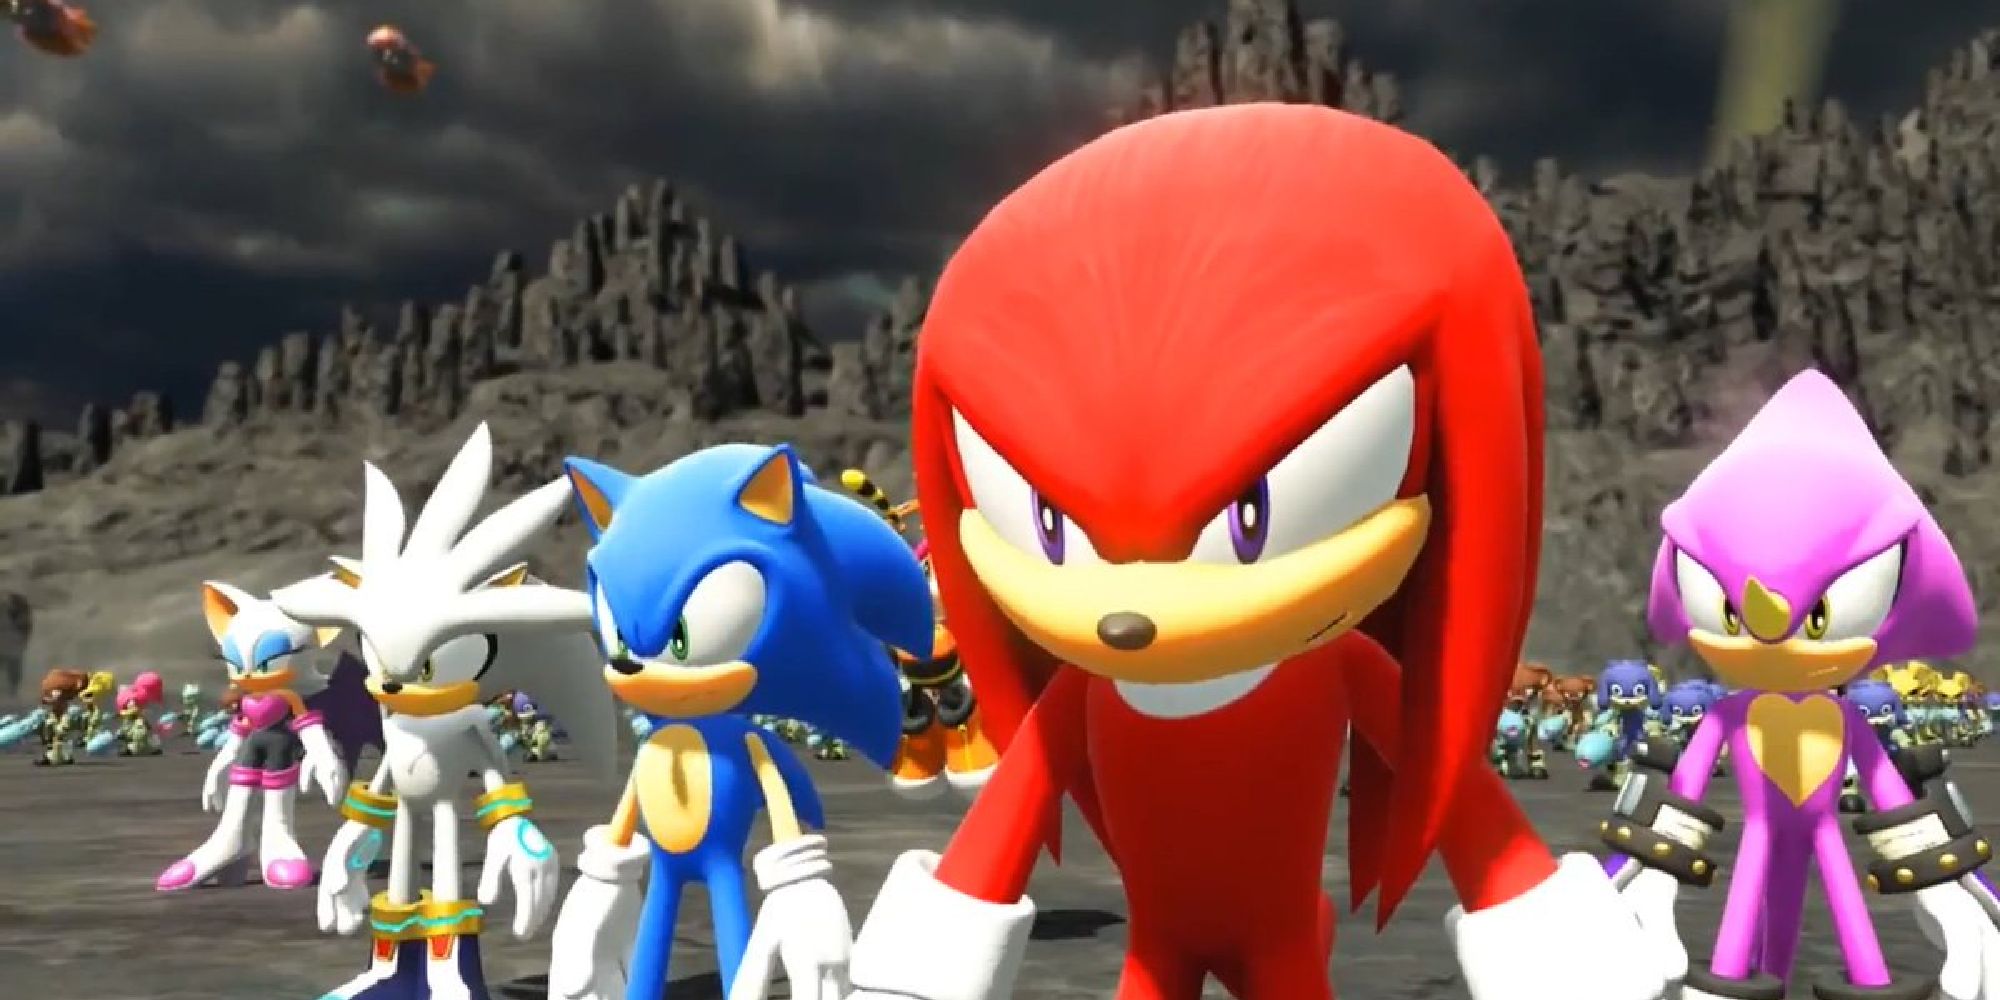 Knuckles leading an army alongside Espio, Sonic, Silver, and Rouge